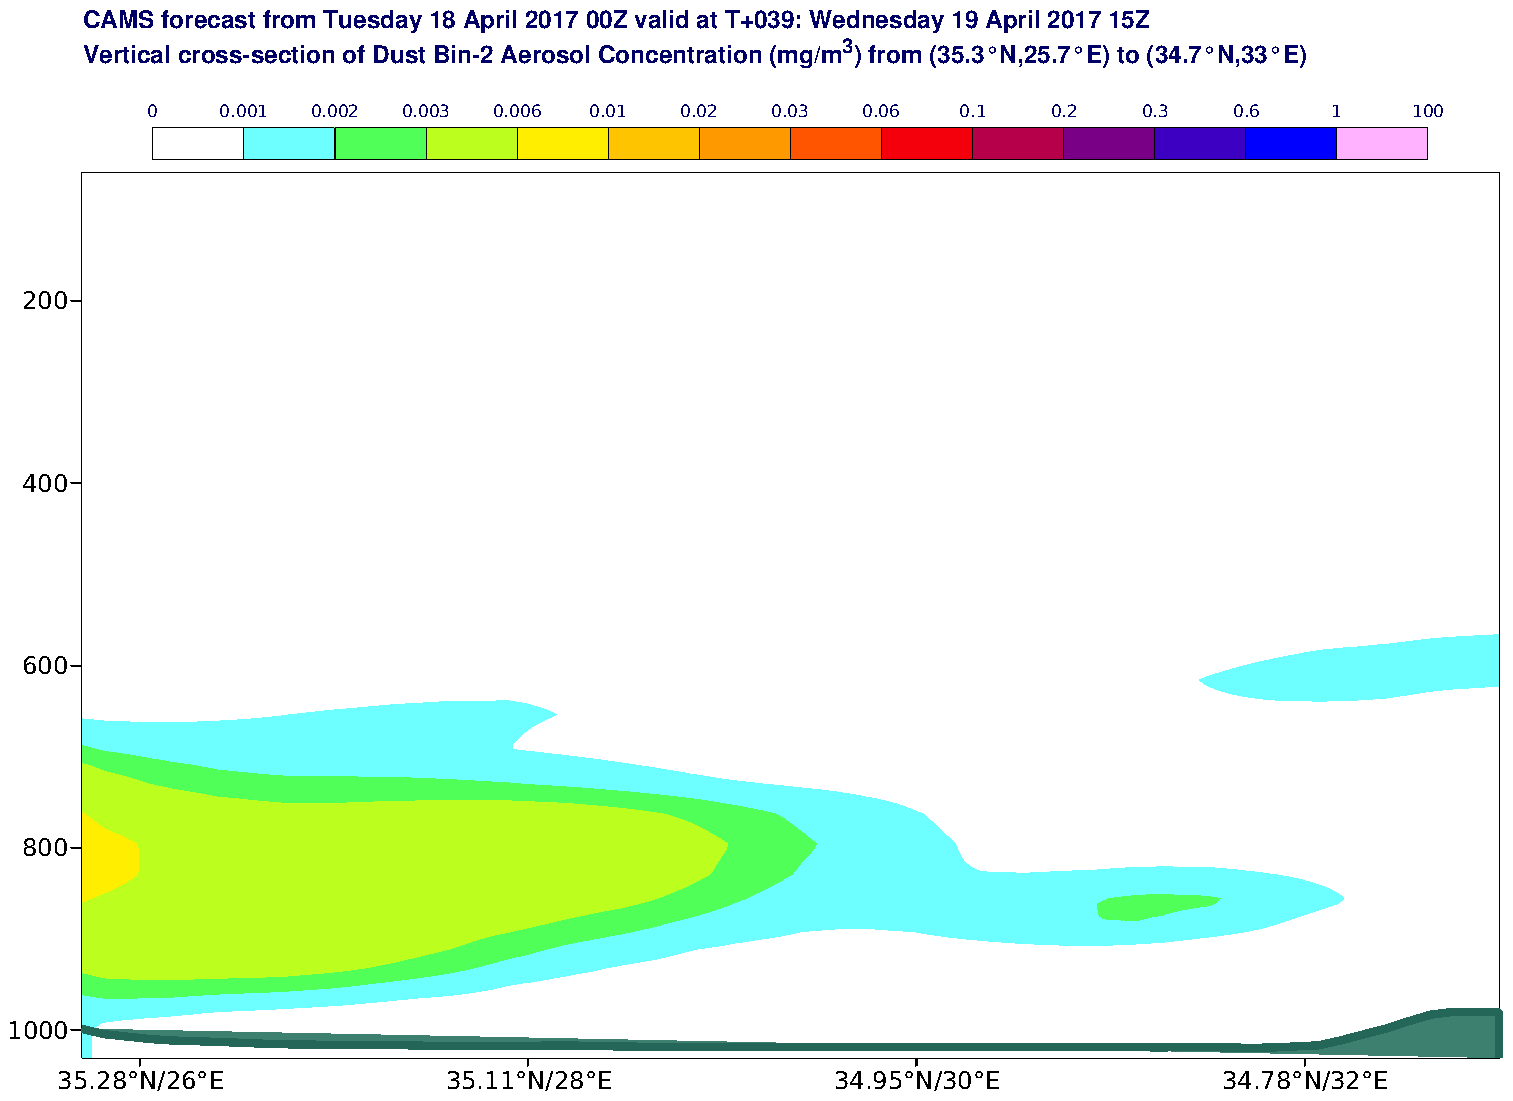 Vertical cross-section of Dust Bin-2 Aerosol Concentration (mg/m3) valid at T39 - 2017-04-19 15:00